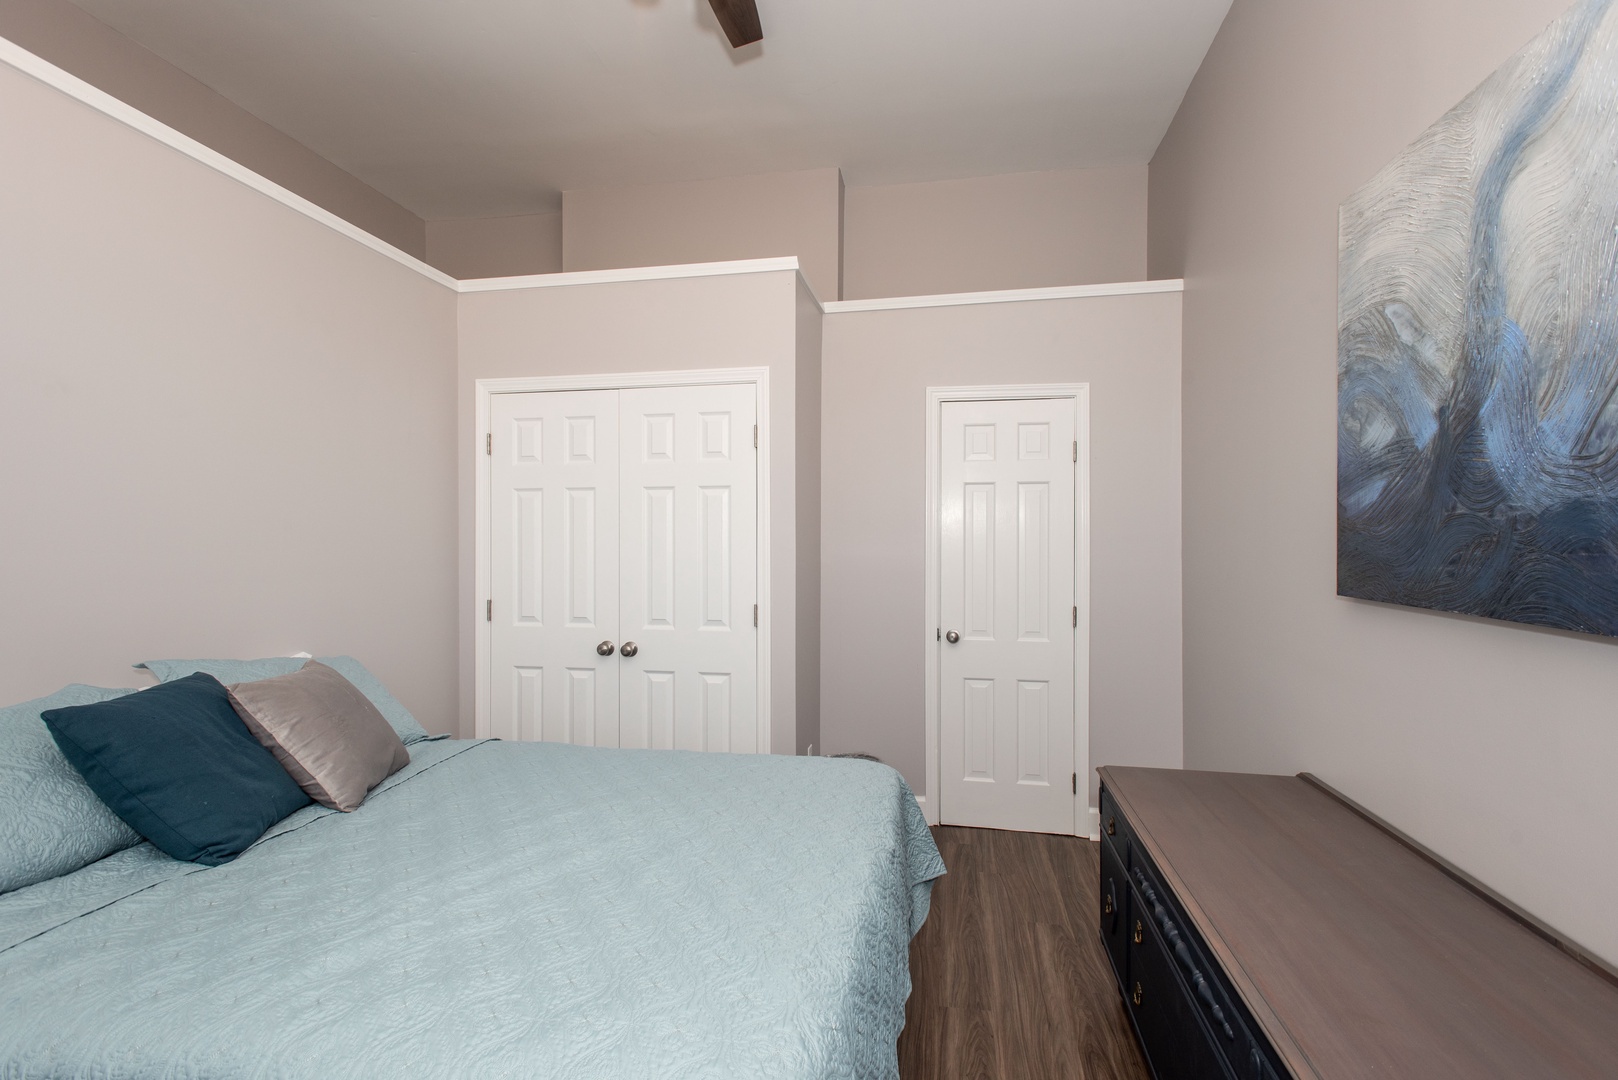 Apt 1 – The bedroom offers a spacious queen bedroom with a large closet